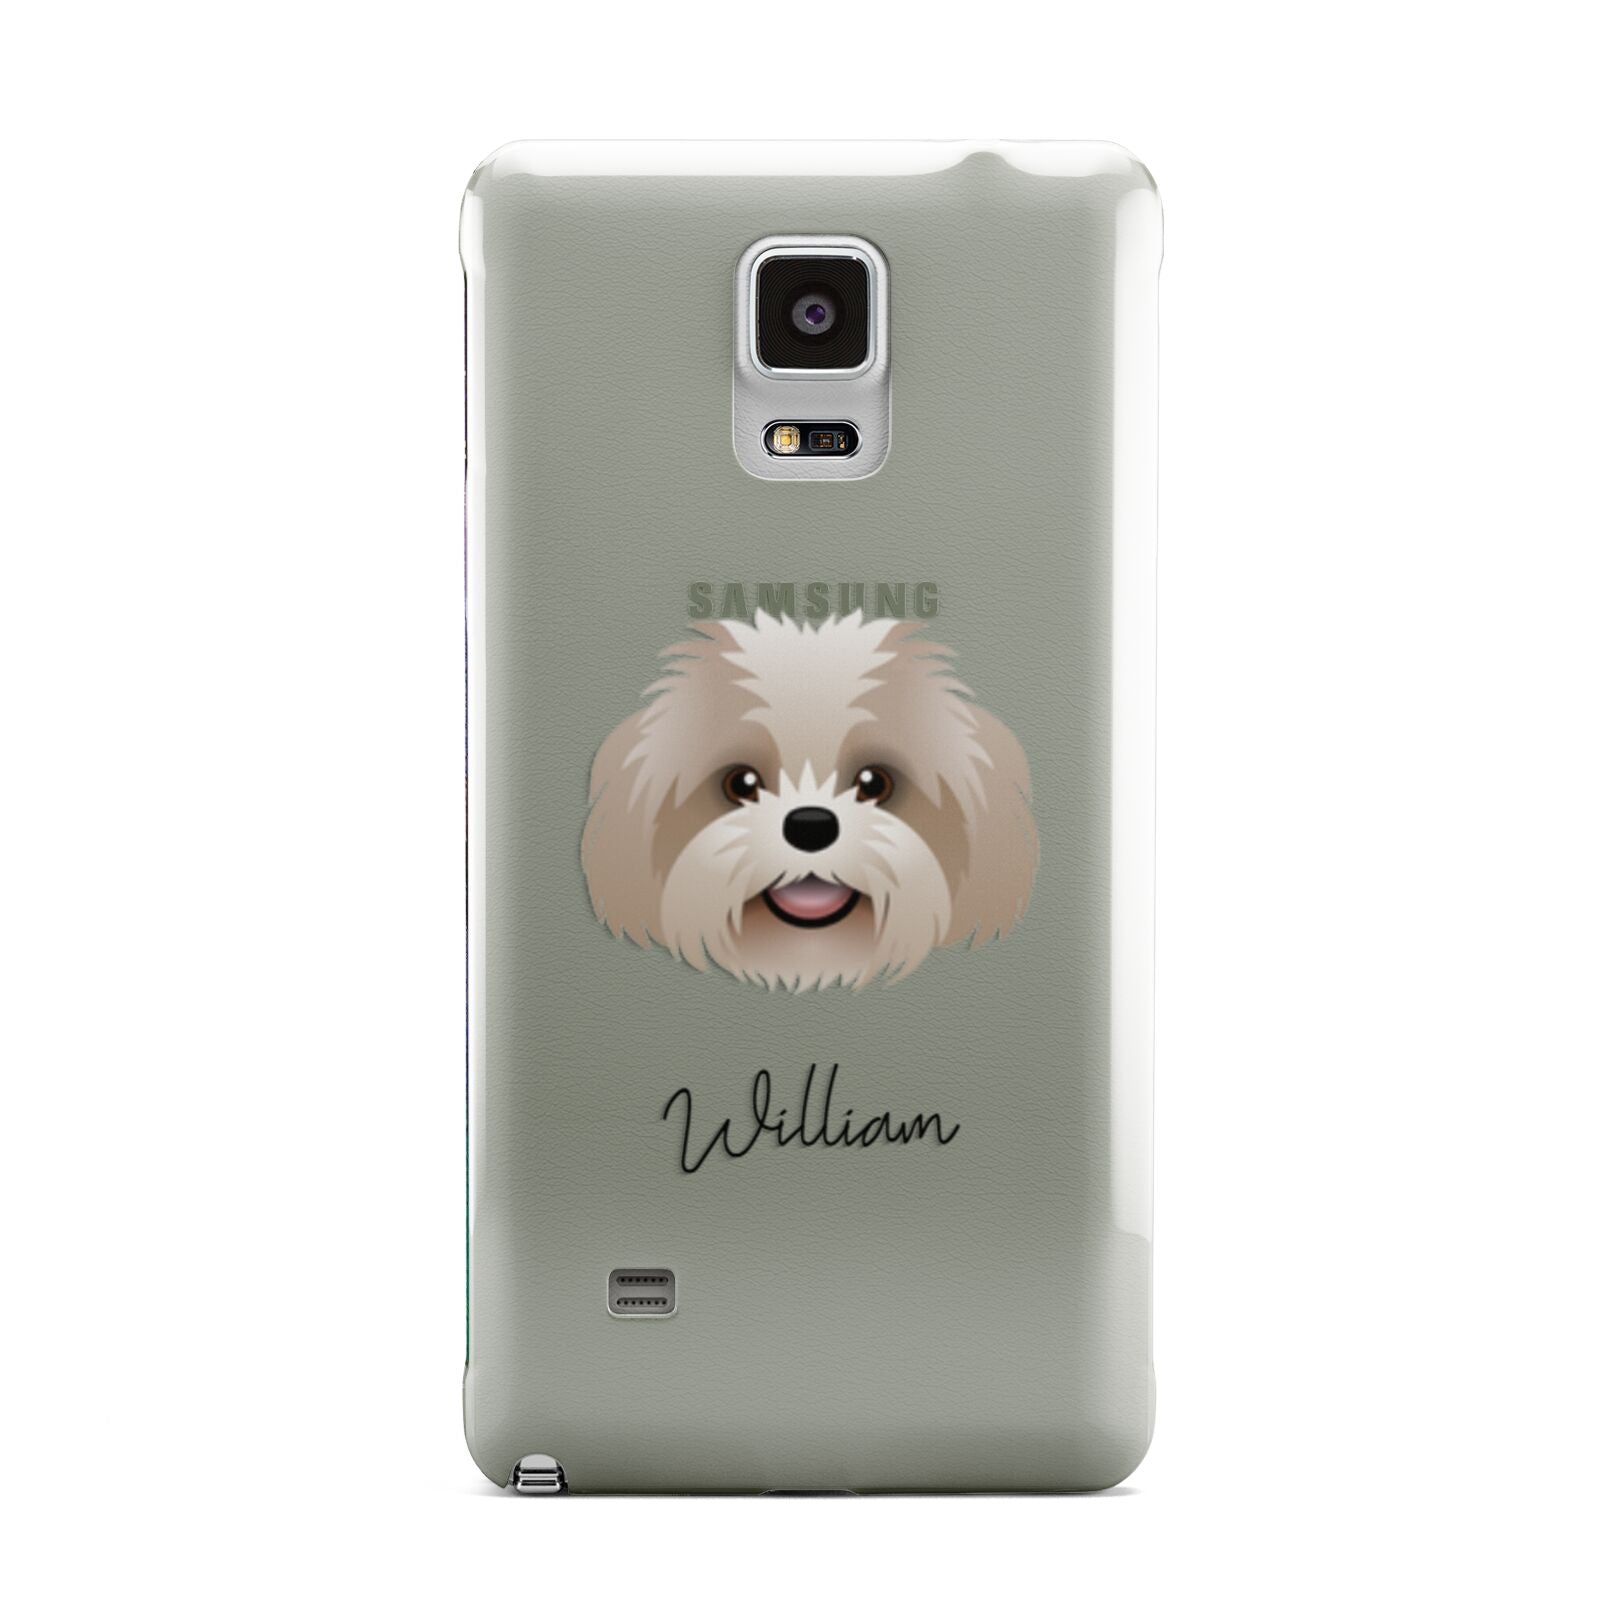 Shih Poo Personalised Samsung Galaxy Note 4 Case